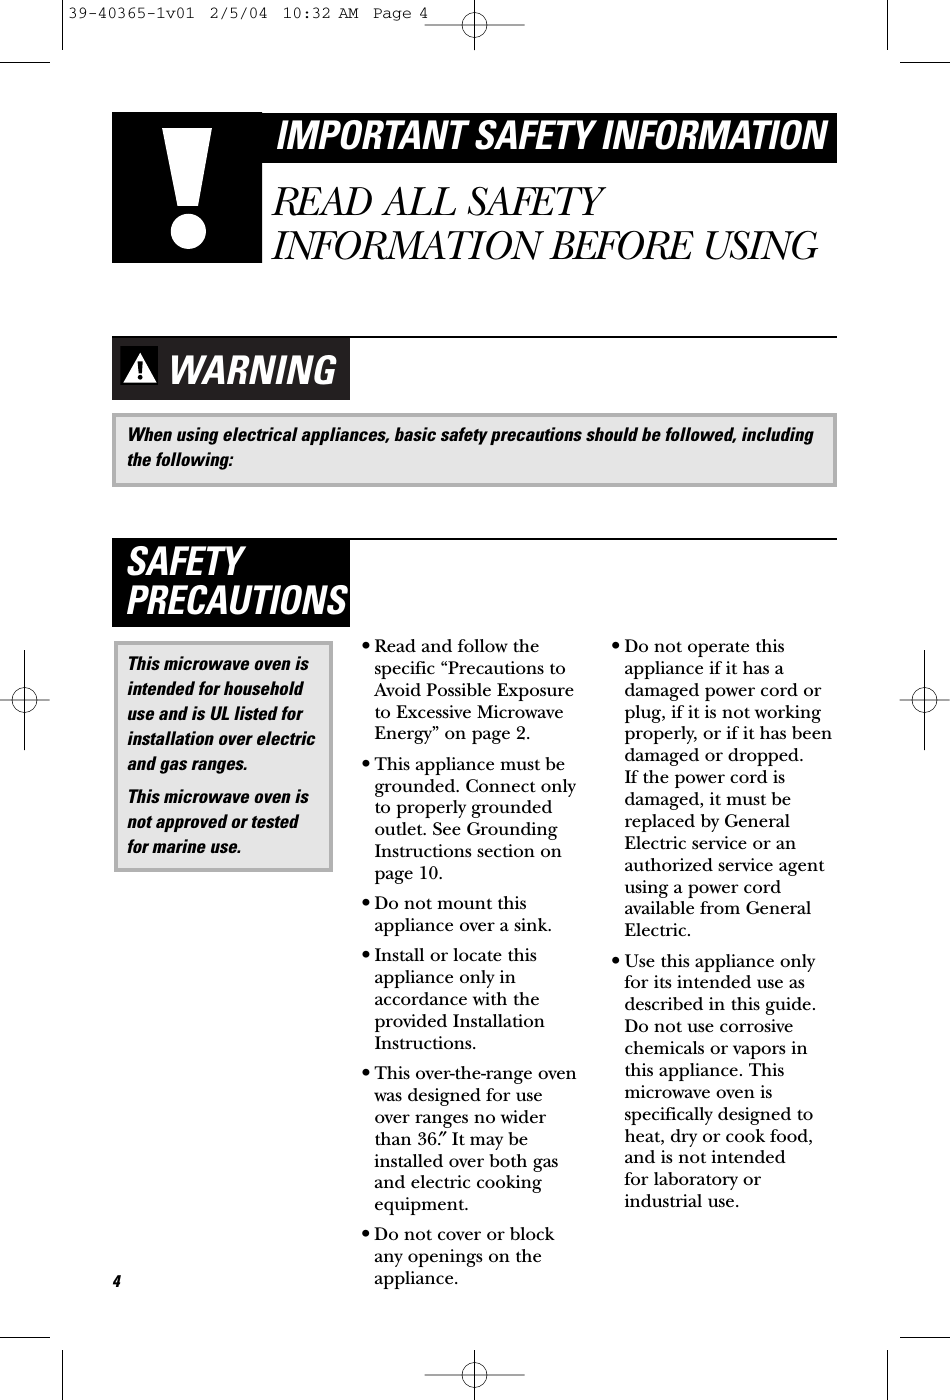 WARNING•Read and follow thespecific “Precautions toAvoid Possible Exposureto Excessive MicrowaveEnergy” on page 2.•This appliance must begrounded. Connect onlyto properly groundedoutlet. See GroundingInstructions section onpage 10.•Do not mount thisappliance over a sink. •Install or locate thisappliance only inaccordance with theprovided InstallationInstructions.•This over-the-range ovenwas designed for use over ranges no widerthan 36.″It may beinstalled over both gasand electric cookingequipment.•Do not cover or block any openings on theappliance.•Do not operate thisappliance if it has adamaged power cord orplug, if it is not workingproperly, or if it has beendamaged or dropped. If the power cord isdamaged, it must bereplaced by GeneralElectric service or anauthorized service agentusing a power cordavailable from GeneralElectric.•Use this appliance onlyfor its intended use asdescribed in this guide.Do not use corrosivechemicals or vapors inthis appliance. Thismicrowave oven isspecifically designed toheat, dry or cook food,and is not intended for laboratory orindustrial use.This microwave oven isintended for householduse and is UL listed forinstallation over electricand gas ranges.This microwave oven isnot approved or testedfor marine use.SAFETYPRECAUTIONS4IMPORTANT SAFETY INFORMATIONREAD ALL SAFETYINFORMATION BEFORE USINGWhen using electrical appliances, basic safety precautions should be followed, includingthe following:39-40365-1v01  2/5/04  10:32 AM  Page 4